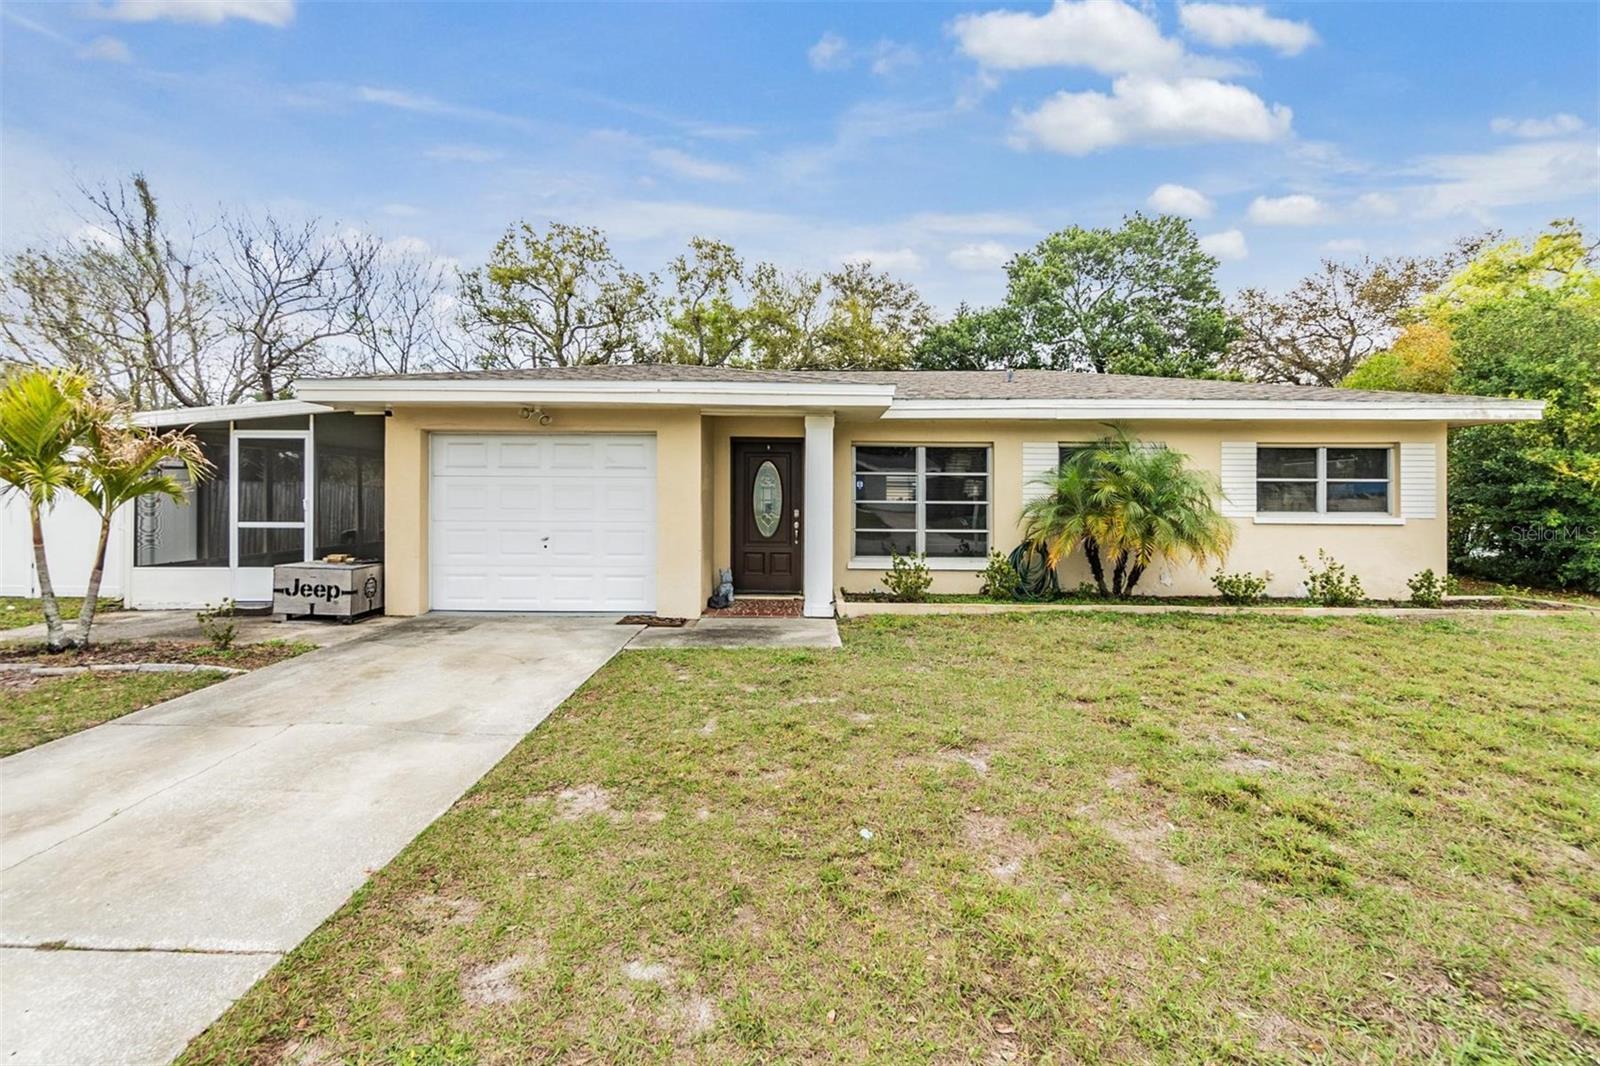 Details for 1715 Audrey Drive, CLEARWATER, FL 33759